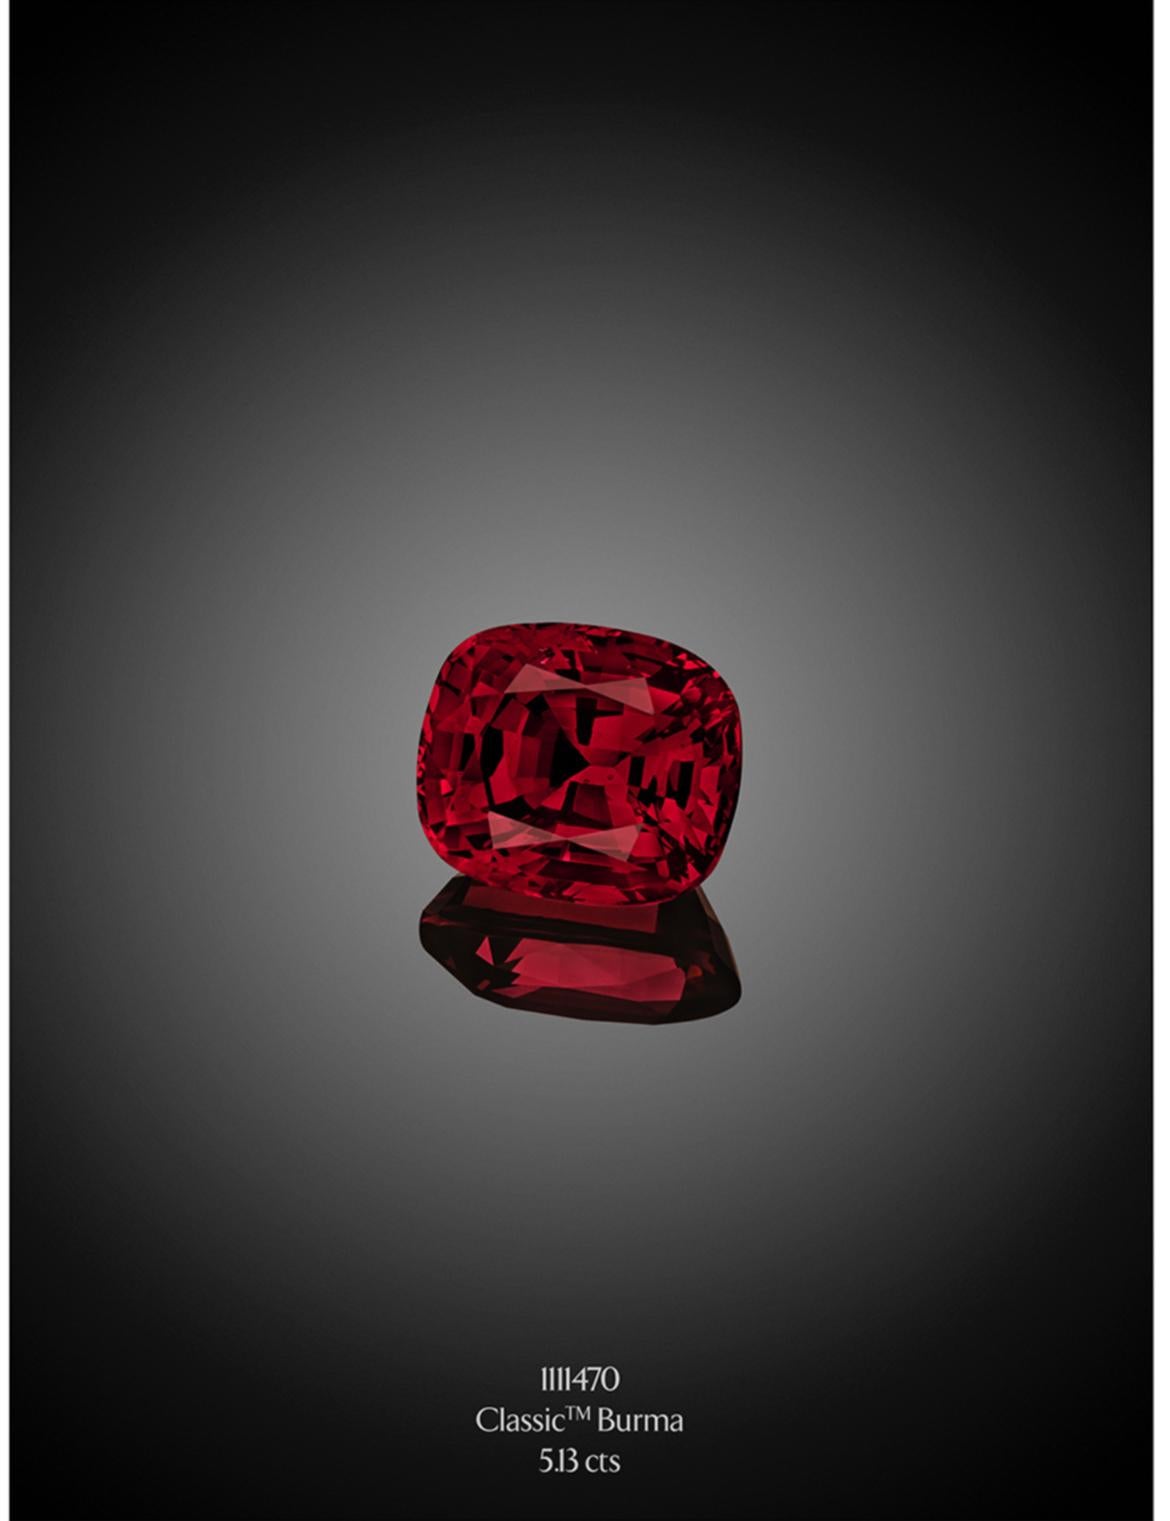 This exceptional 5 carat Burma Red Spinel cushion-cut gem, has been awarded the distinguished 